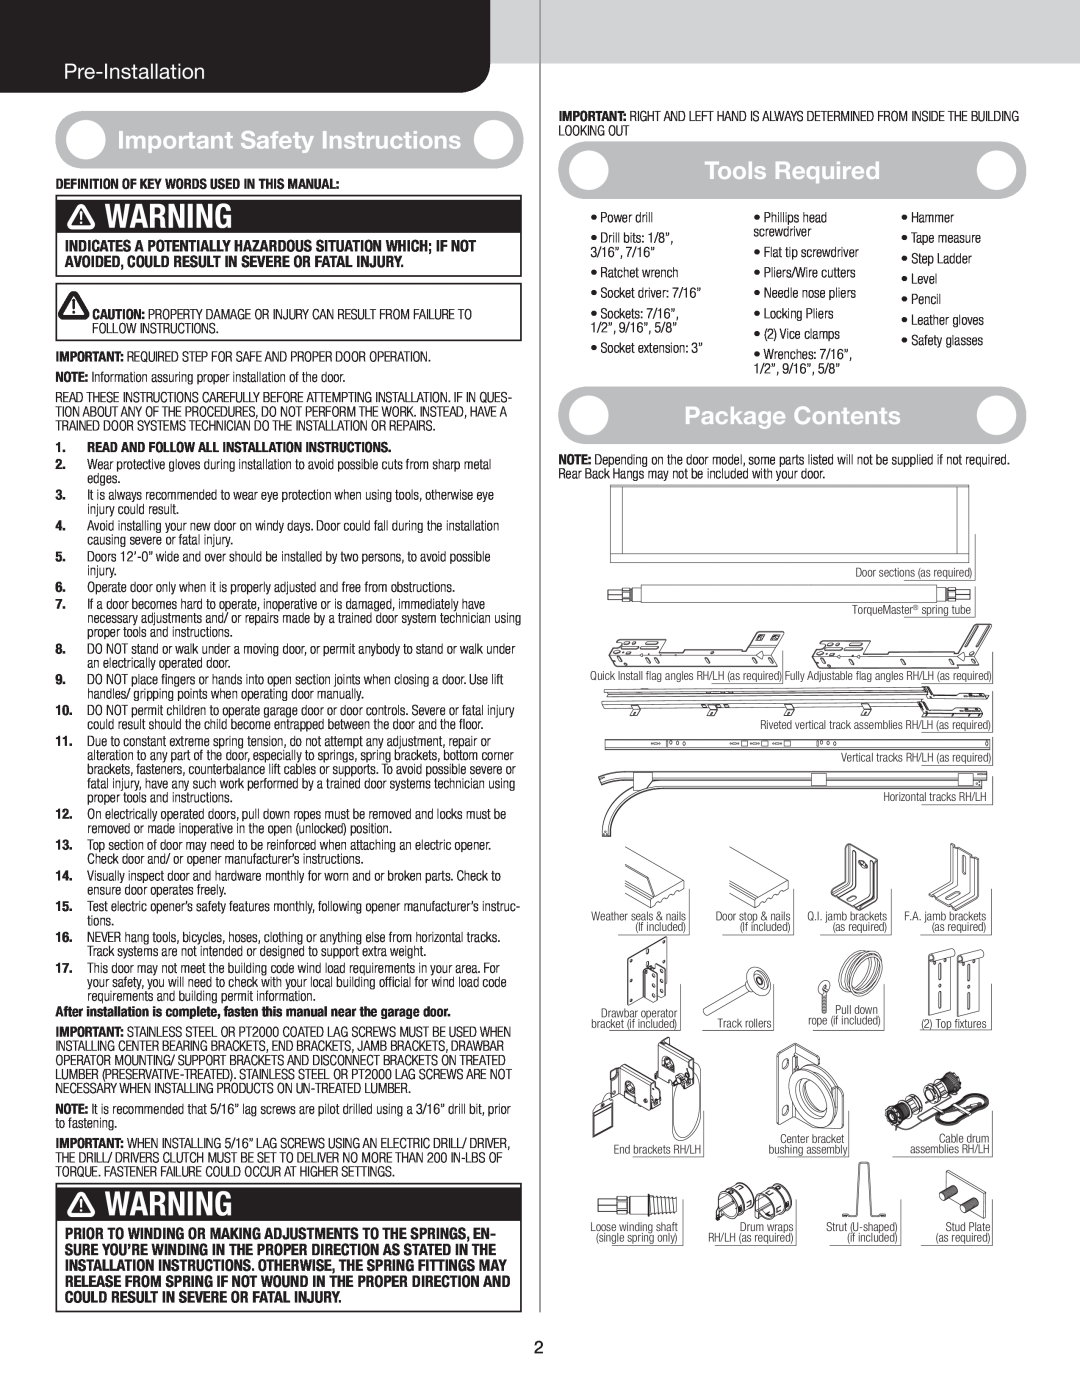 Wayne-Dalton 9800 WarningARNING, Important Safety Instructions, Tools Required, Package Contents, Pre-Installation 